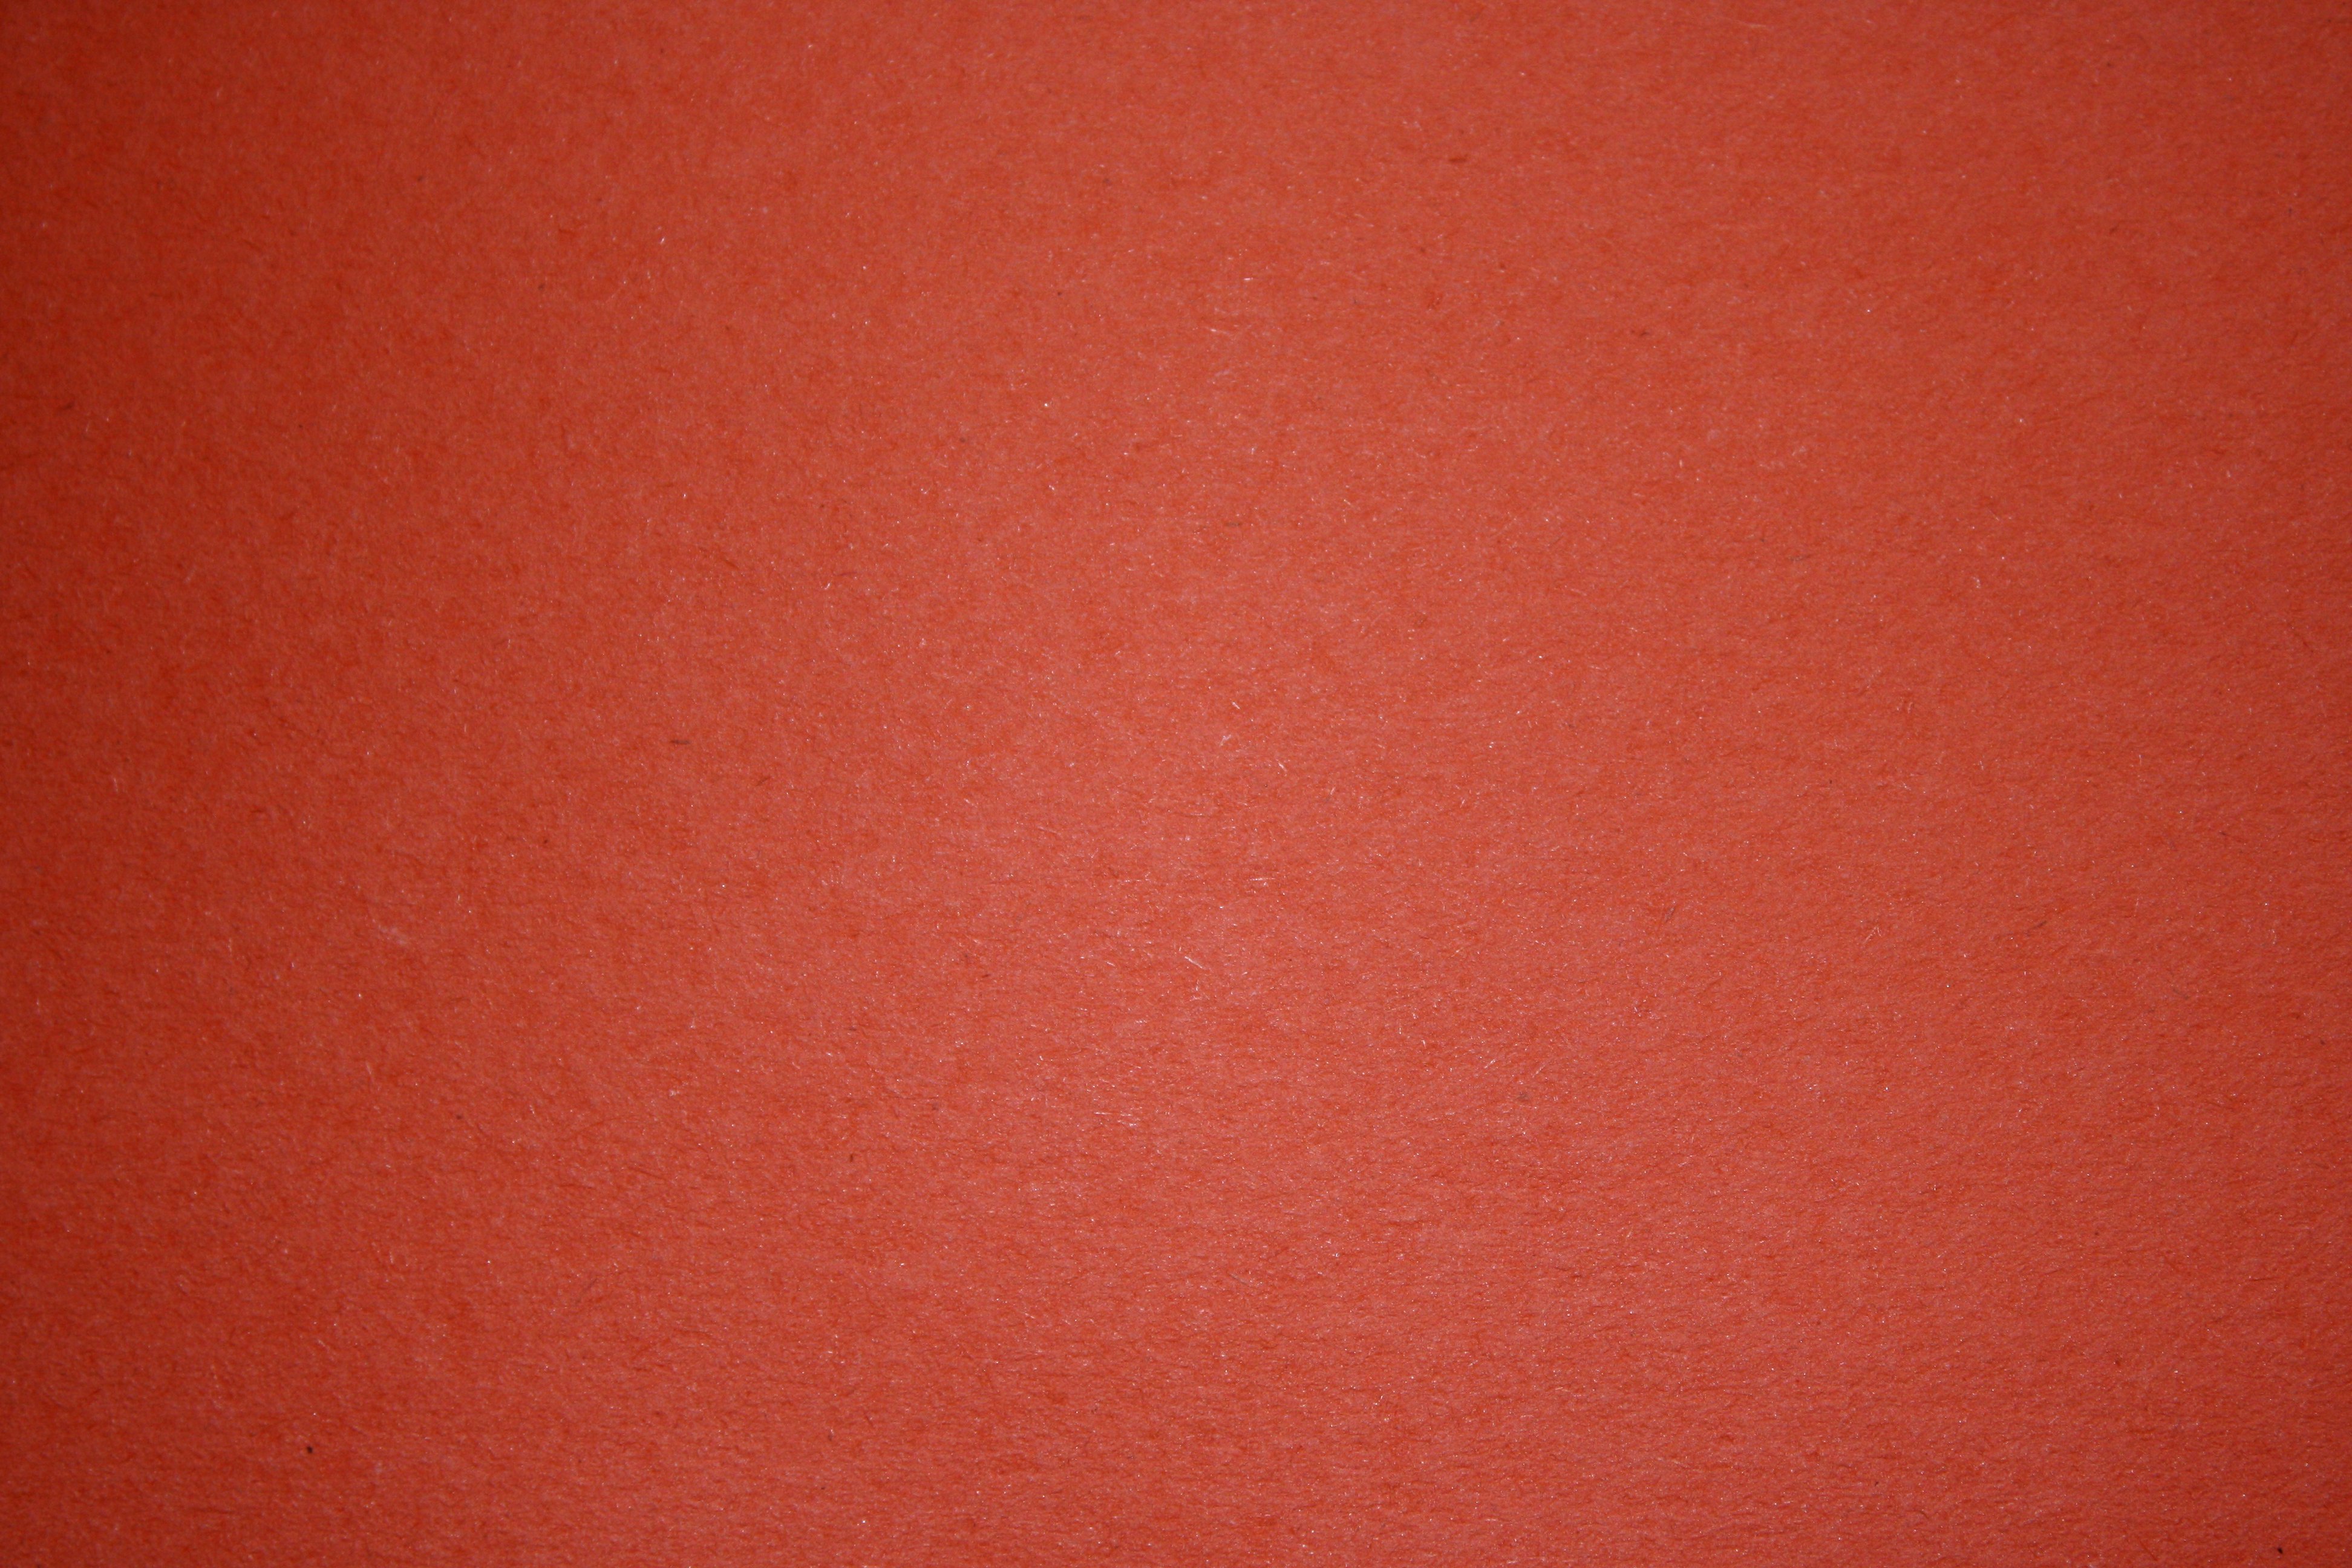 Texture Red Construction Paper Stock Photo 1969712464